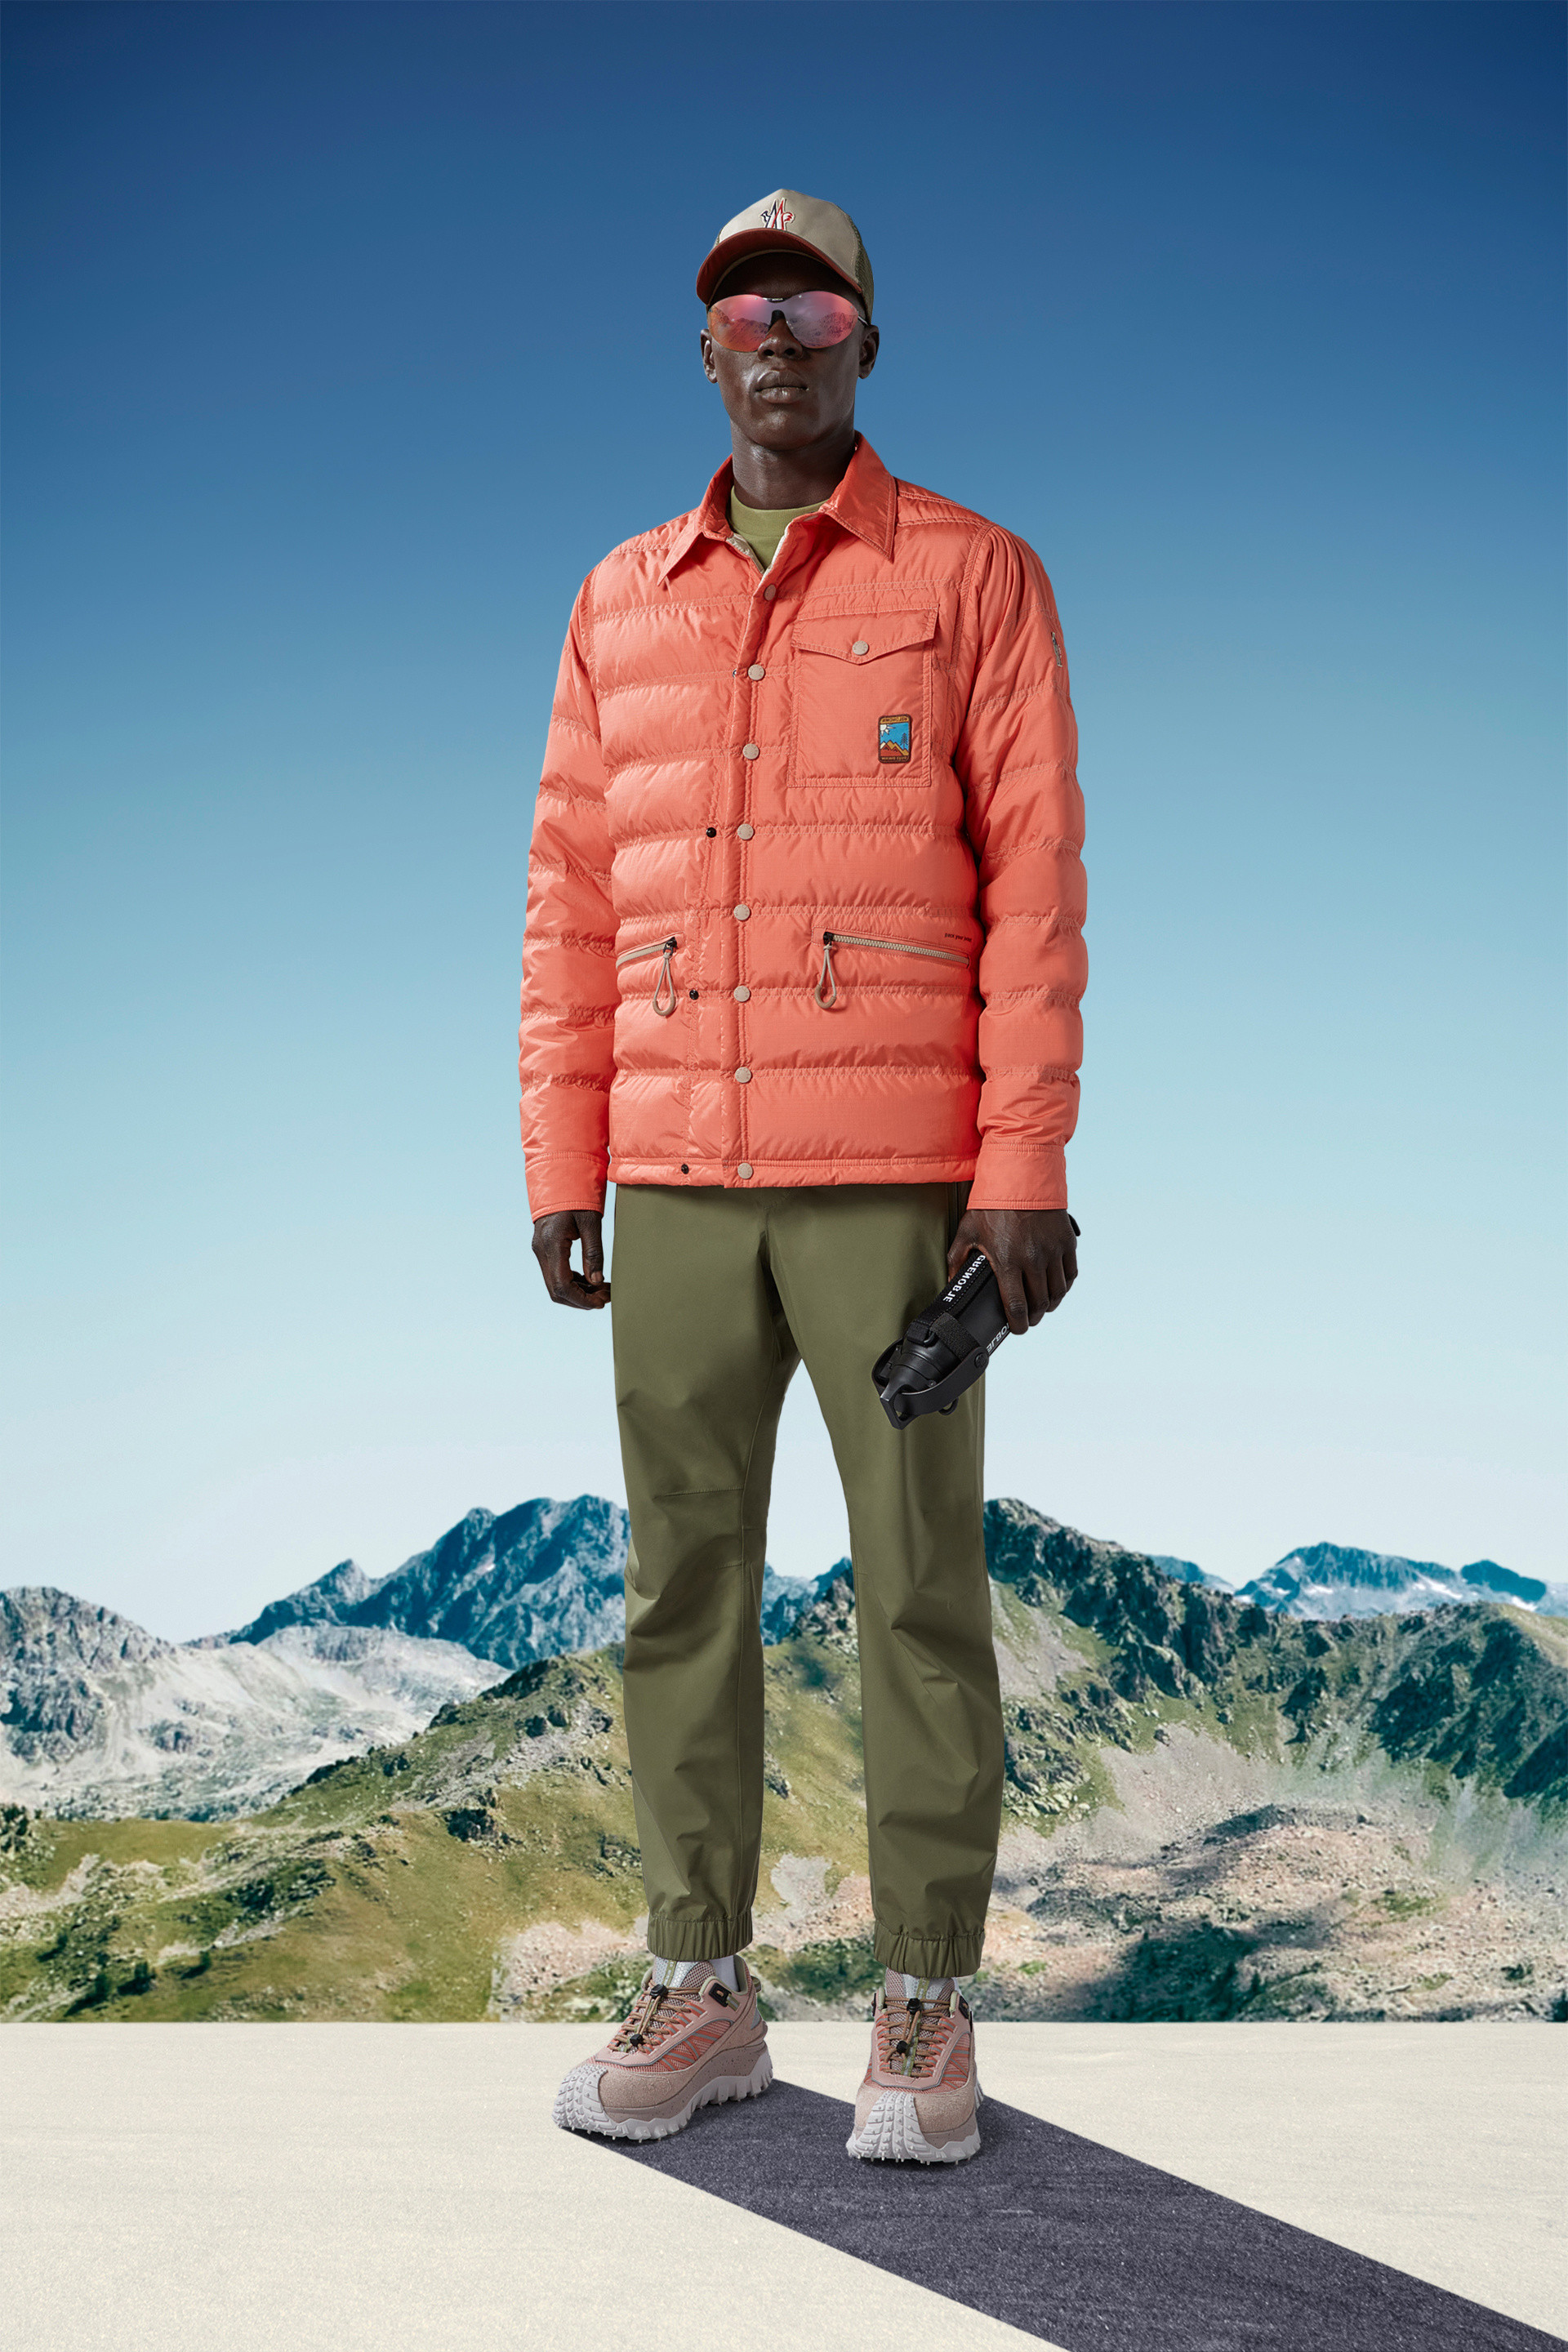 Moncler Grenoble Teames Up With Swiss Company Zai on Ski Collection